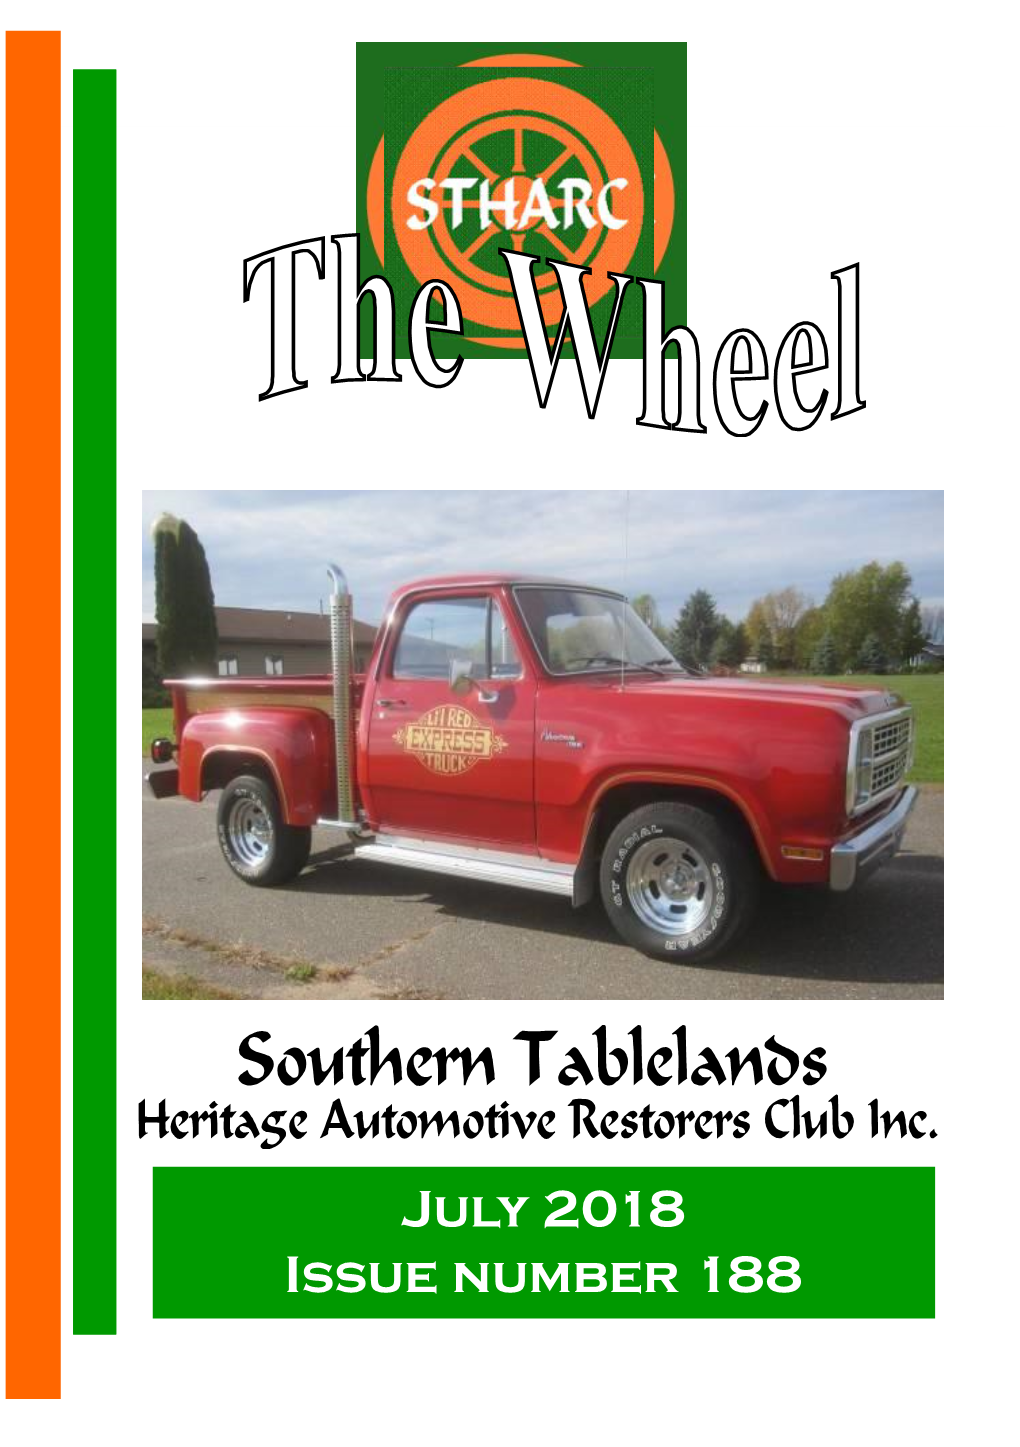 July 2018 Issue Number 188 Page 2 Southern Tablelands Heritage the Wheel # 188 Automotive Restorers Club, Inc